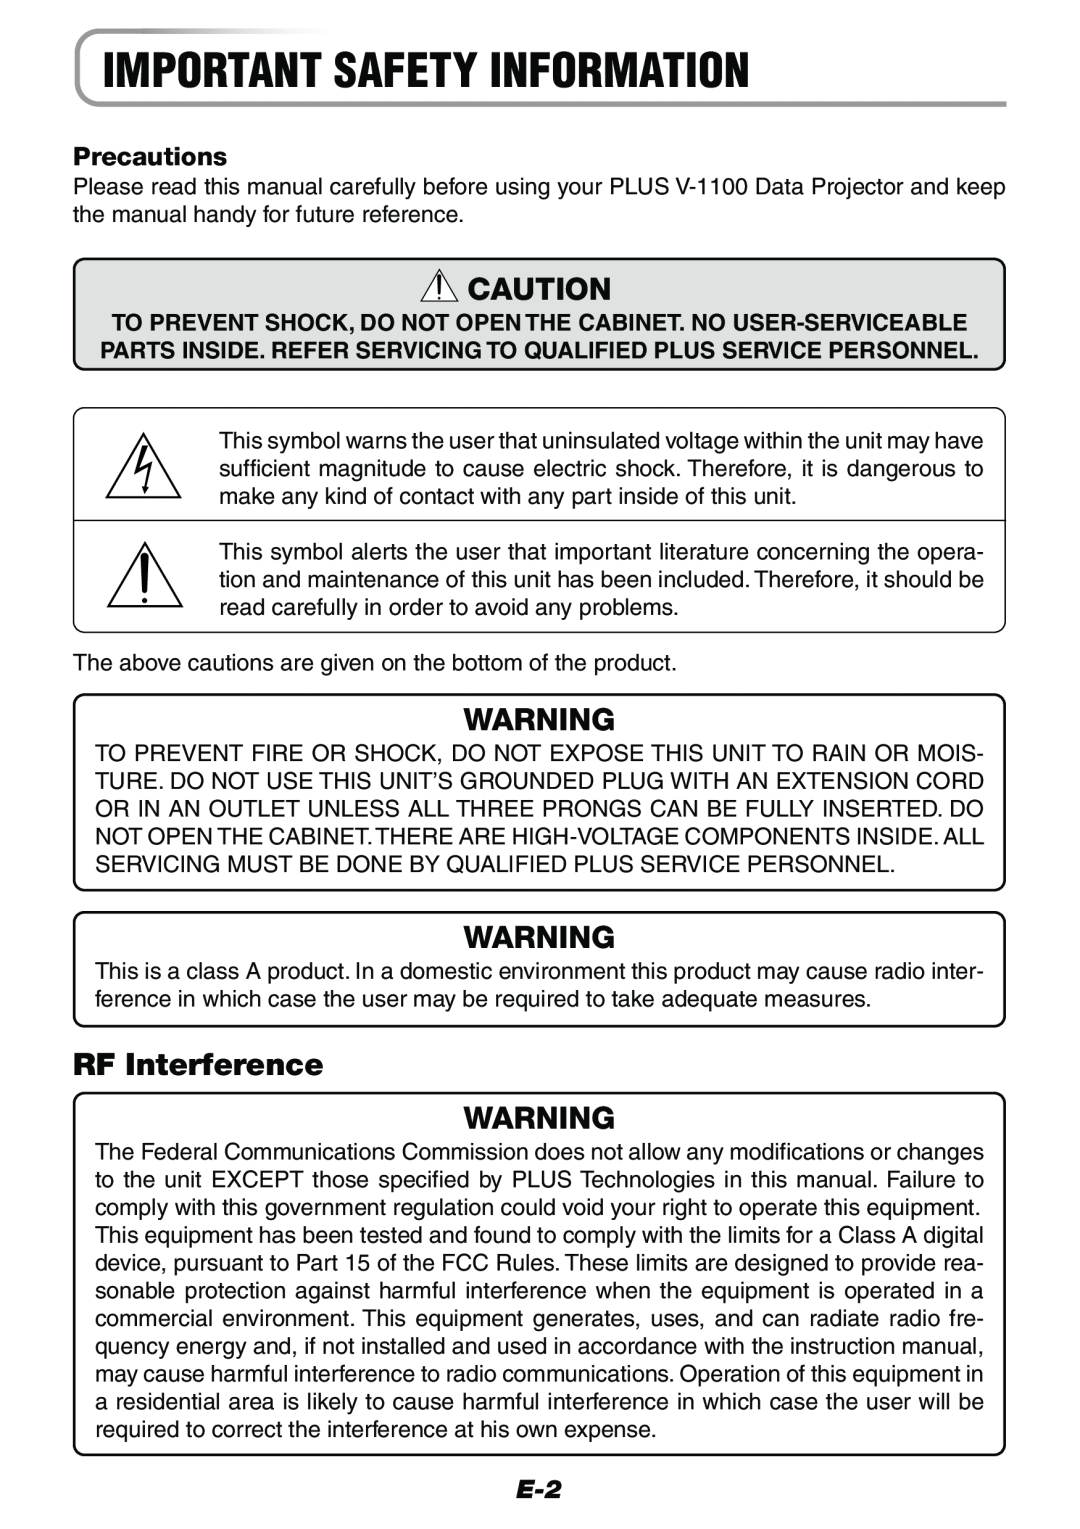 Epson V-1100 user manual Important Safety Information, RF Interference, Precautions 